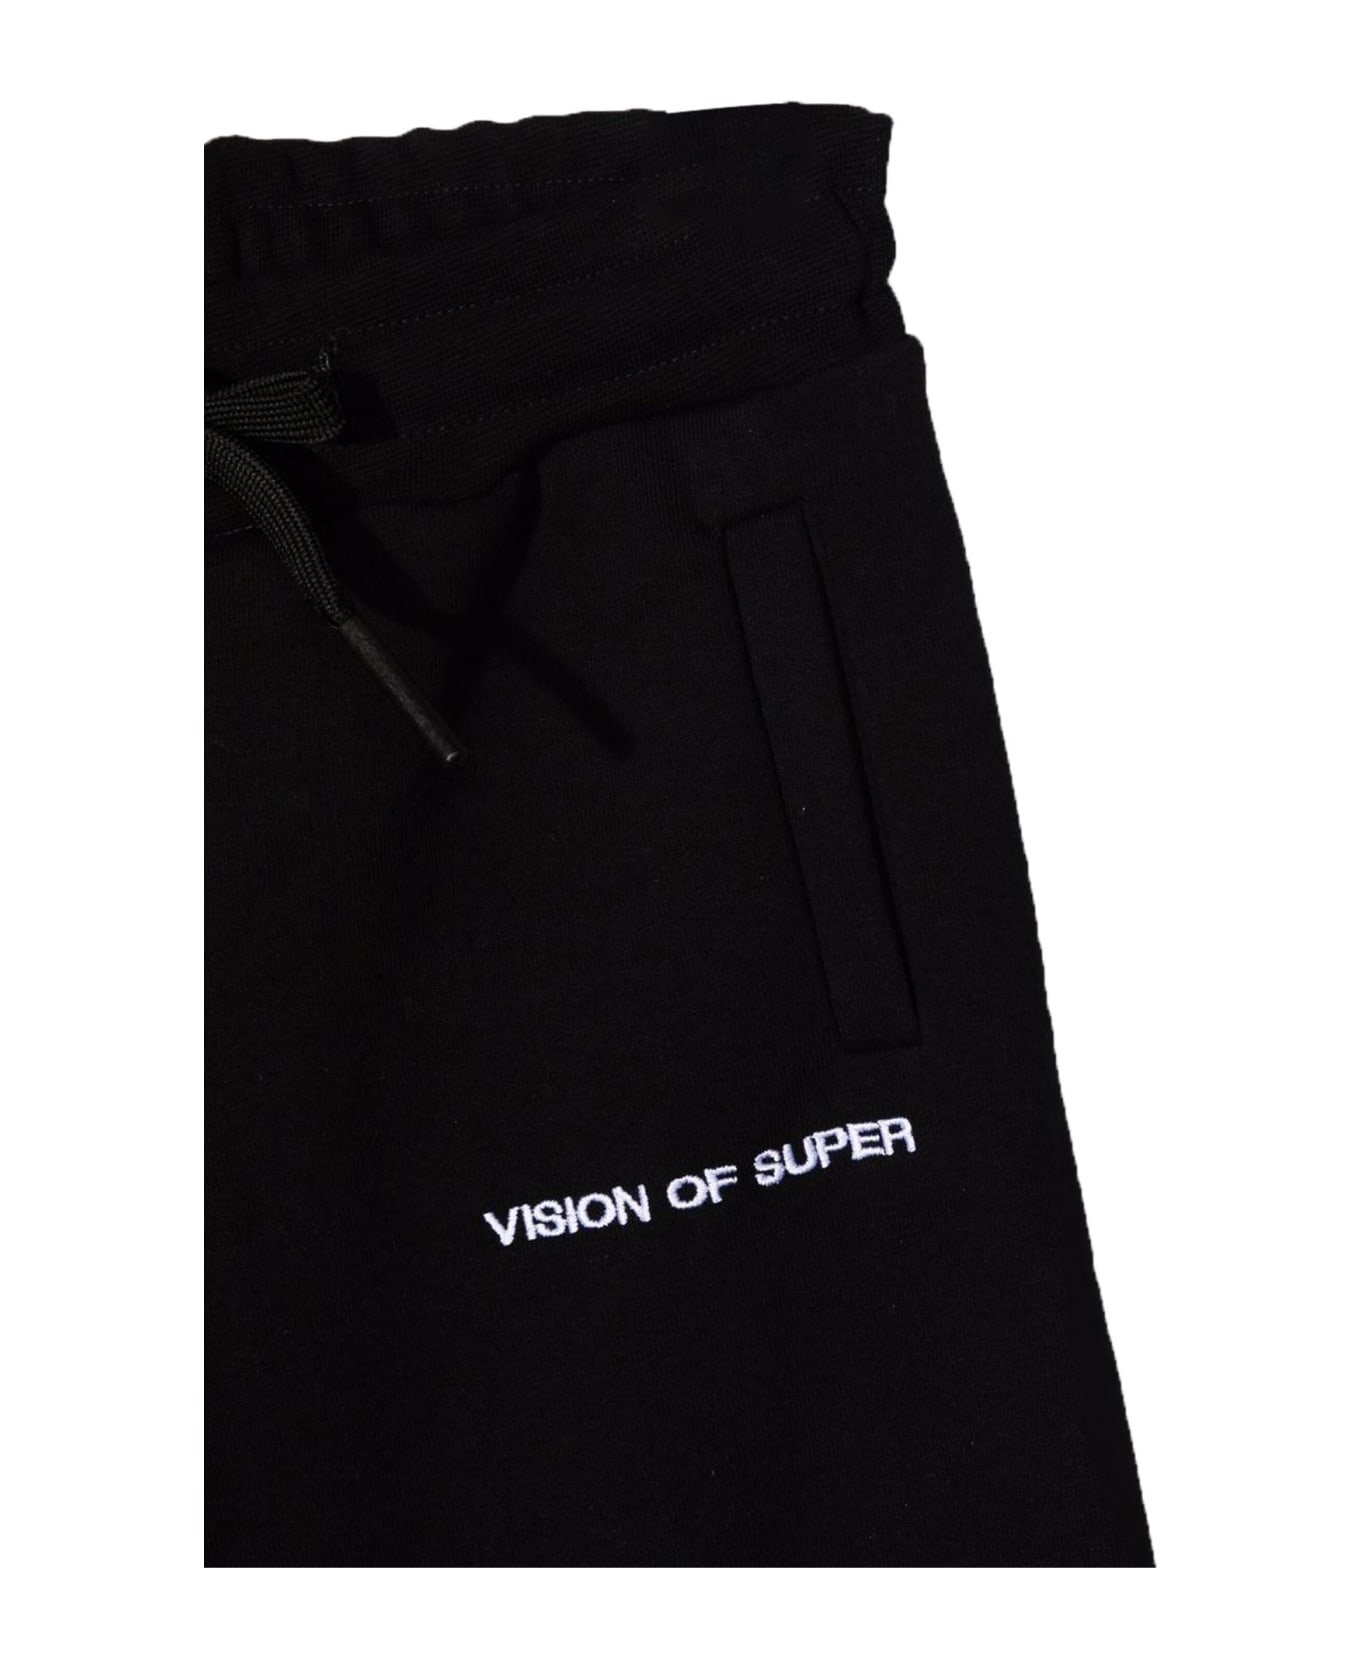 Vision of Super Black Pants Kids With White Spray Flames - NERO